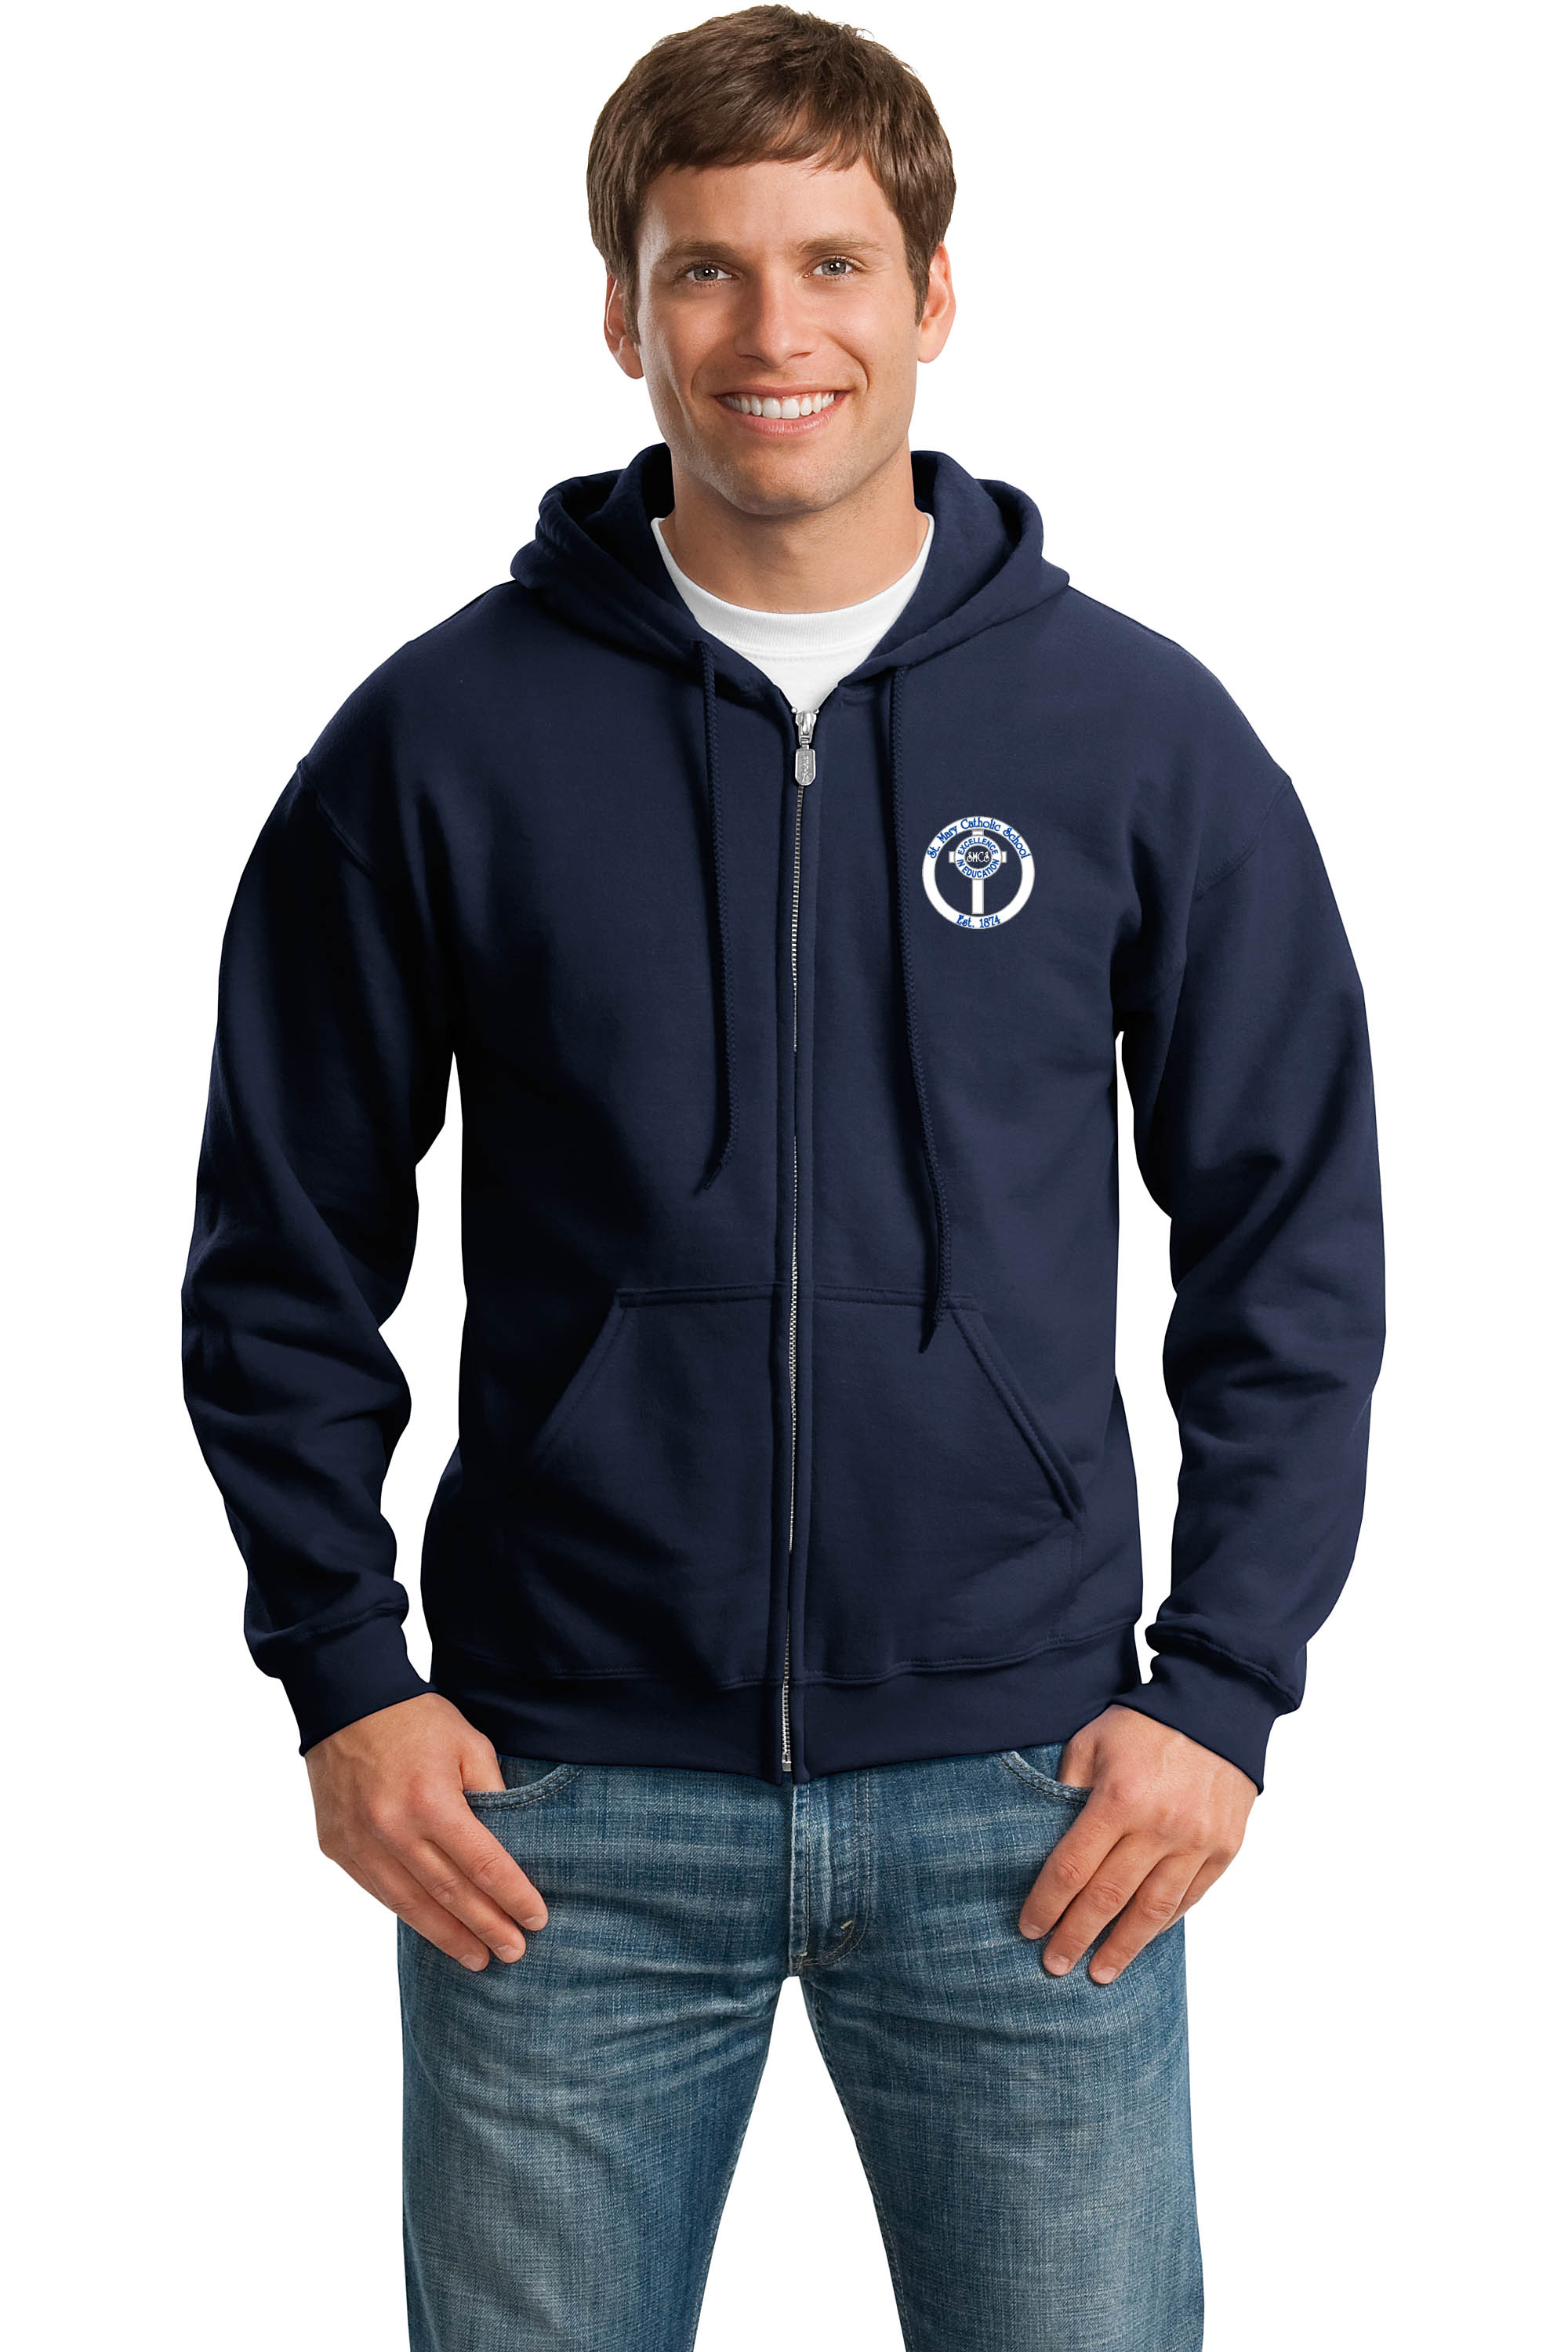 B3-18600 Adult Full Zip Hoodies - Navy with Embroidery